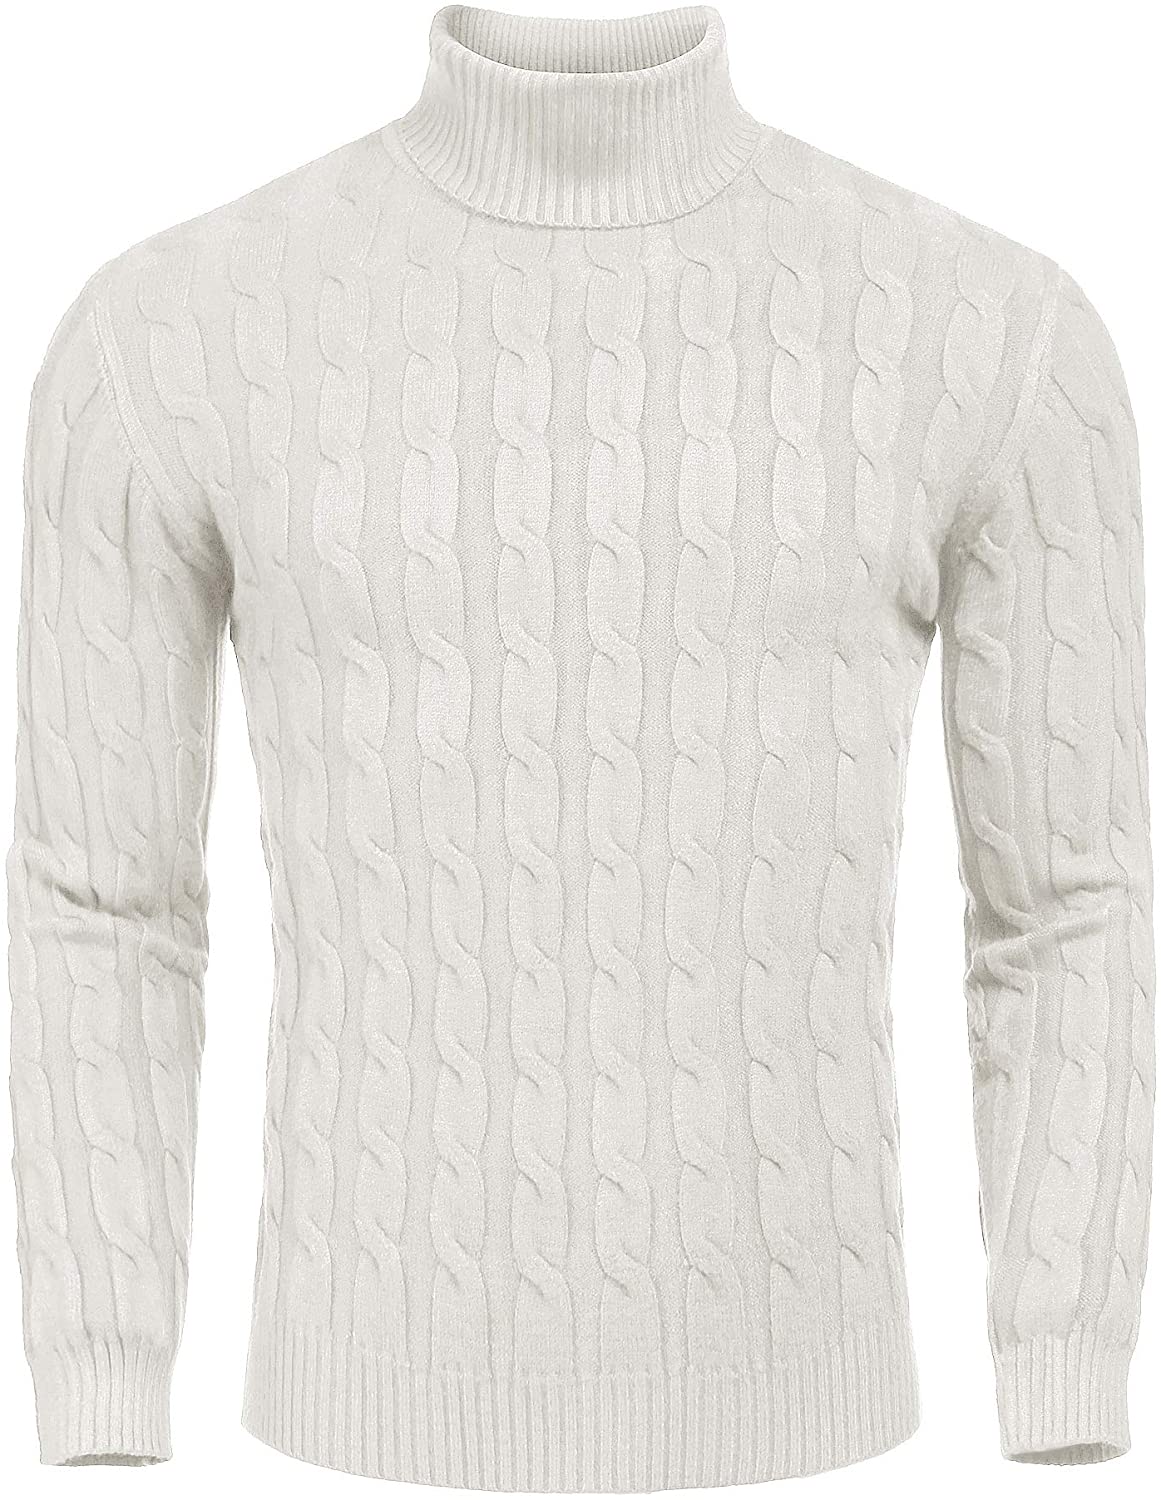 COOFANDY Men's Slim Fit Turtleneck Sweater Casual Twisted Knitted Pullover Sweaters